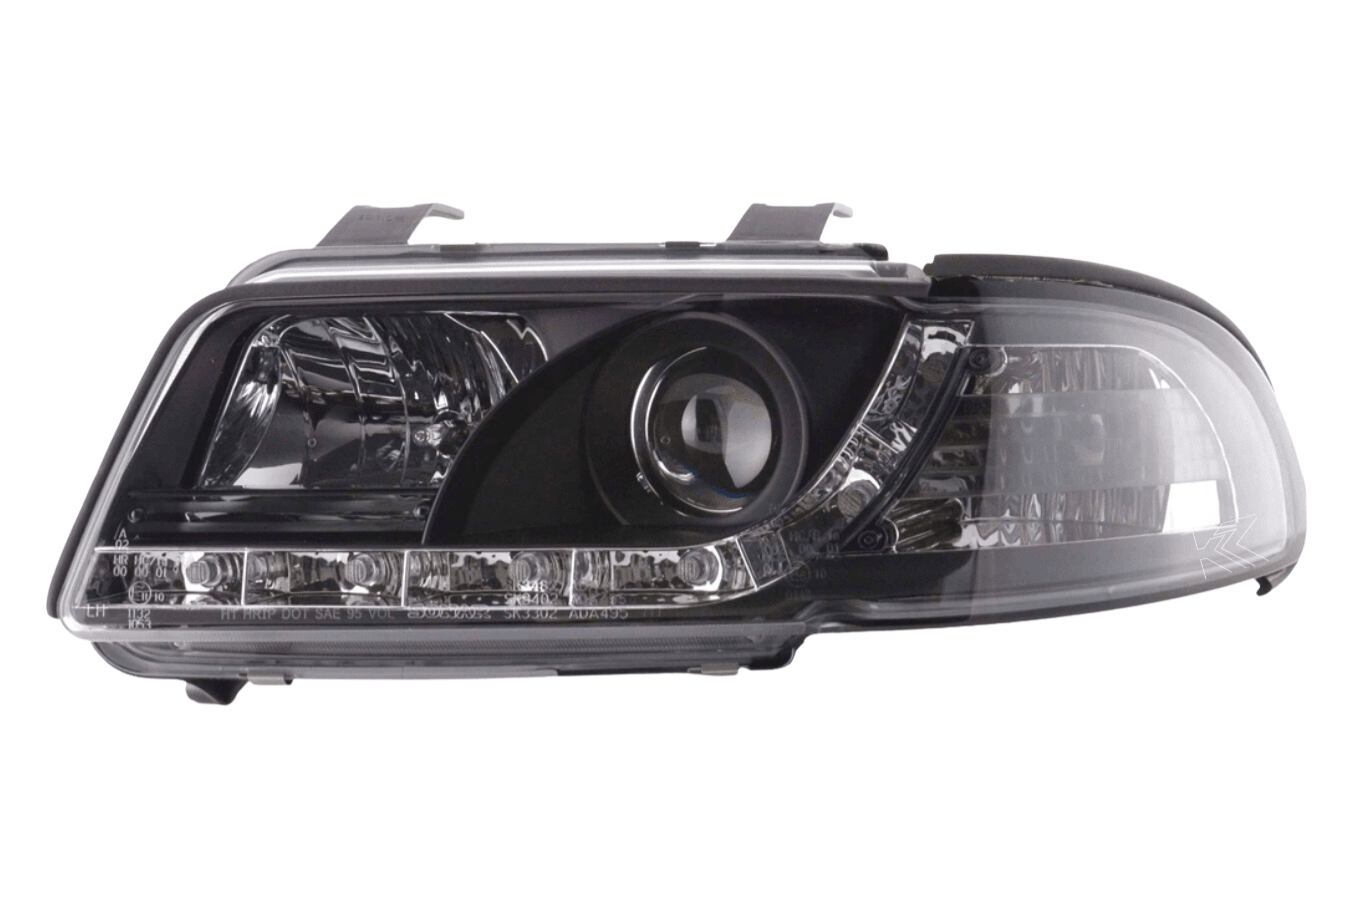 Audi A4 (B5 8D) Black LED Headlights with Daytime Running Lights (1999-2001) - With R87 approval - K2 Industries